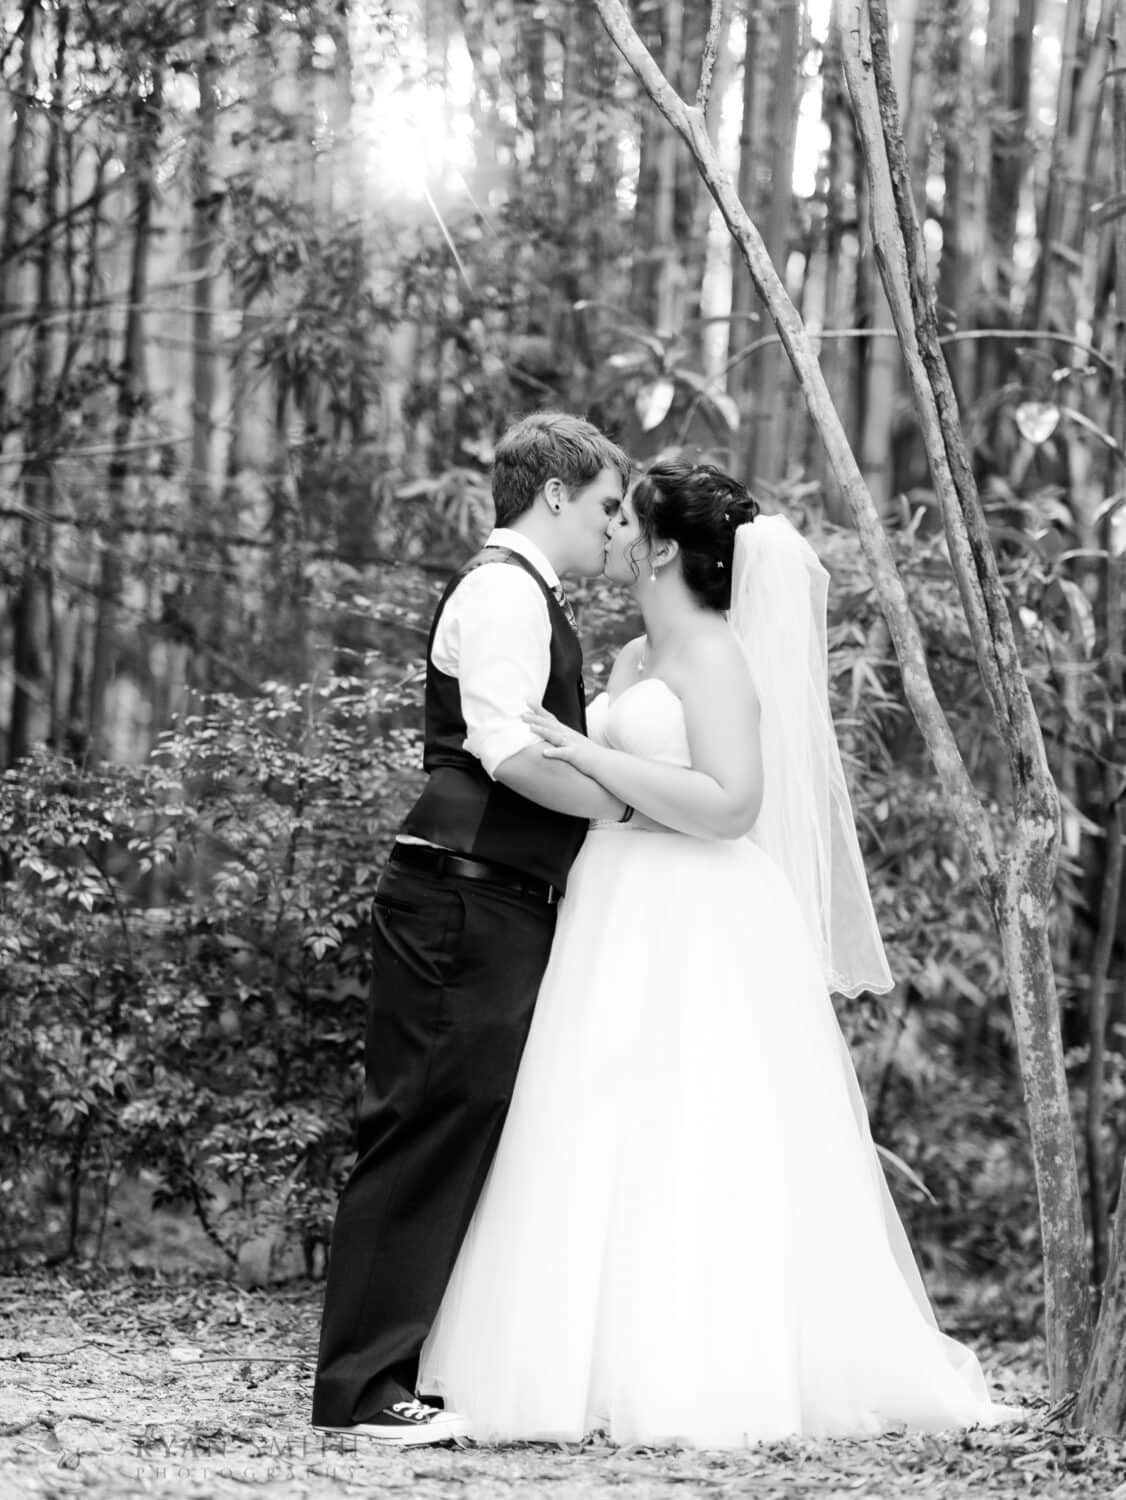 Kiss in the bamboo forest - Magnolia Plantation